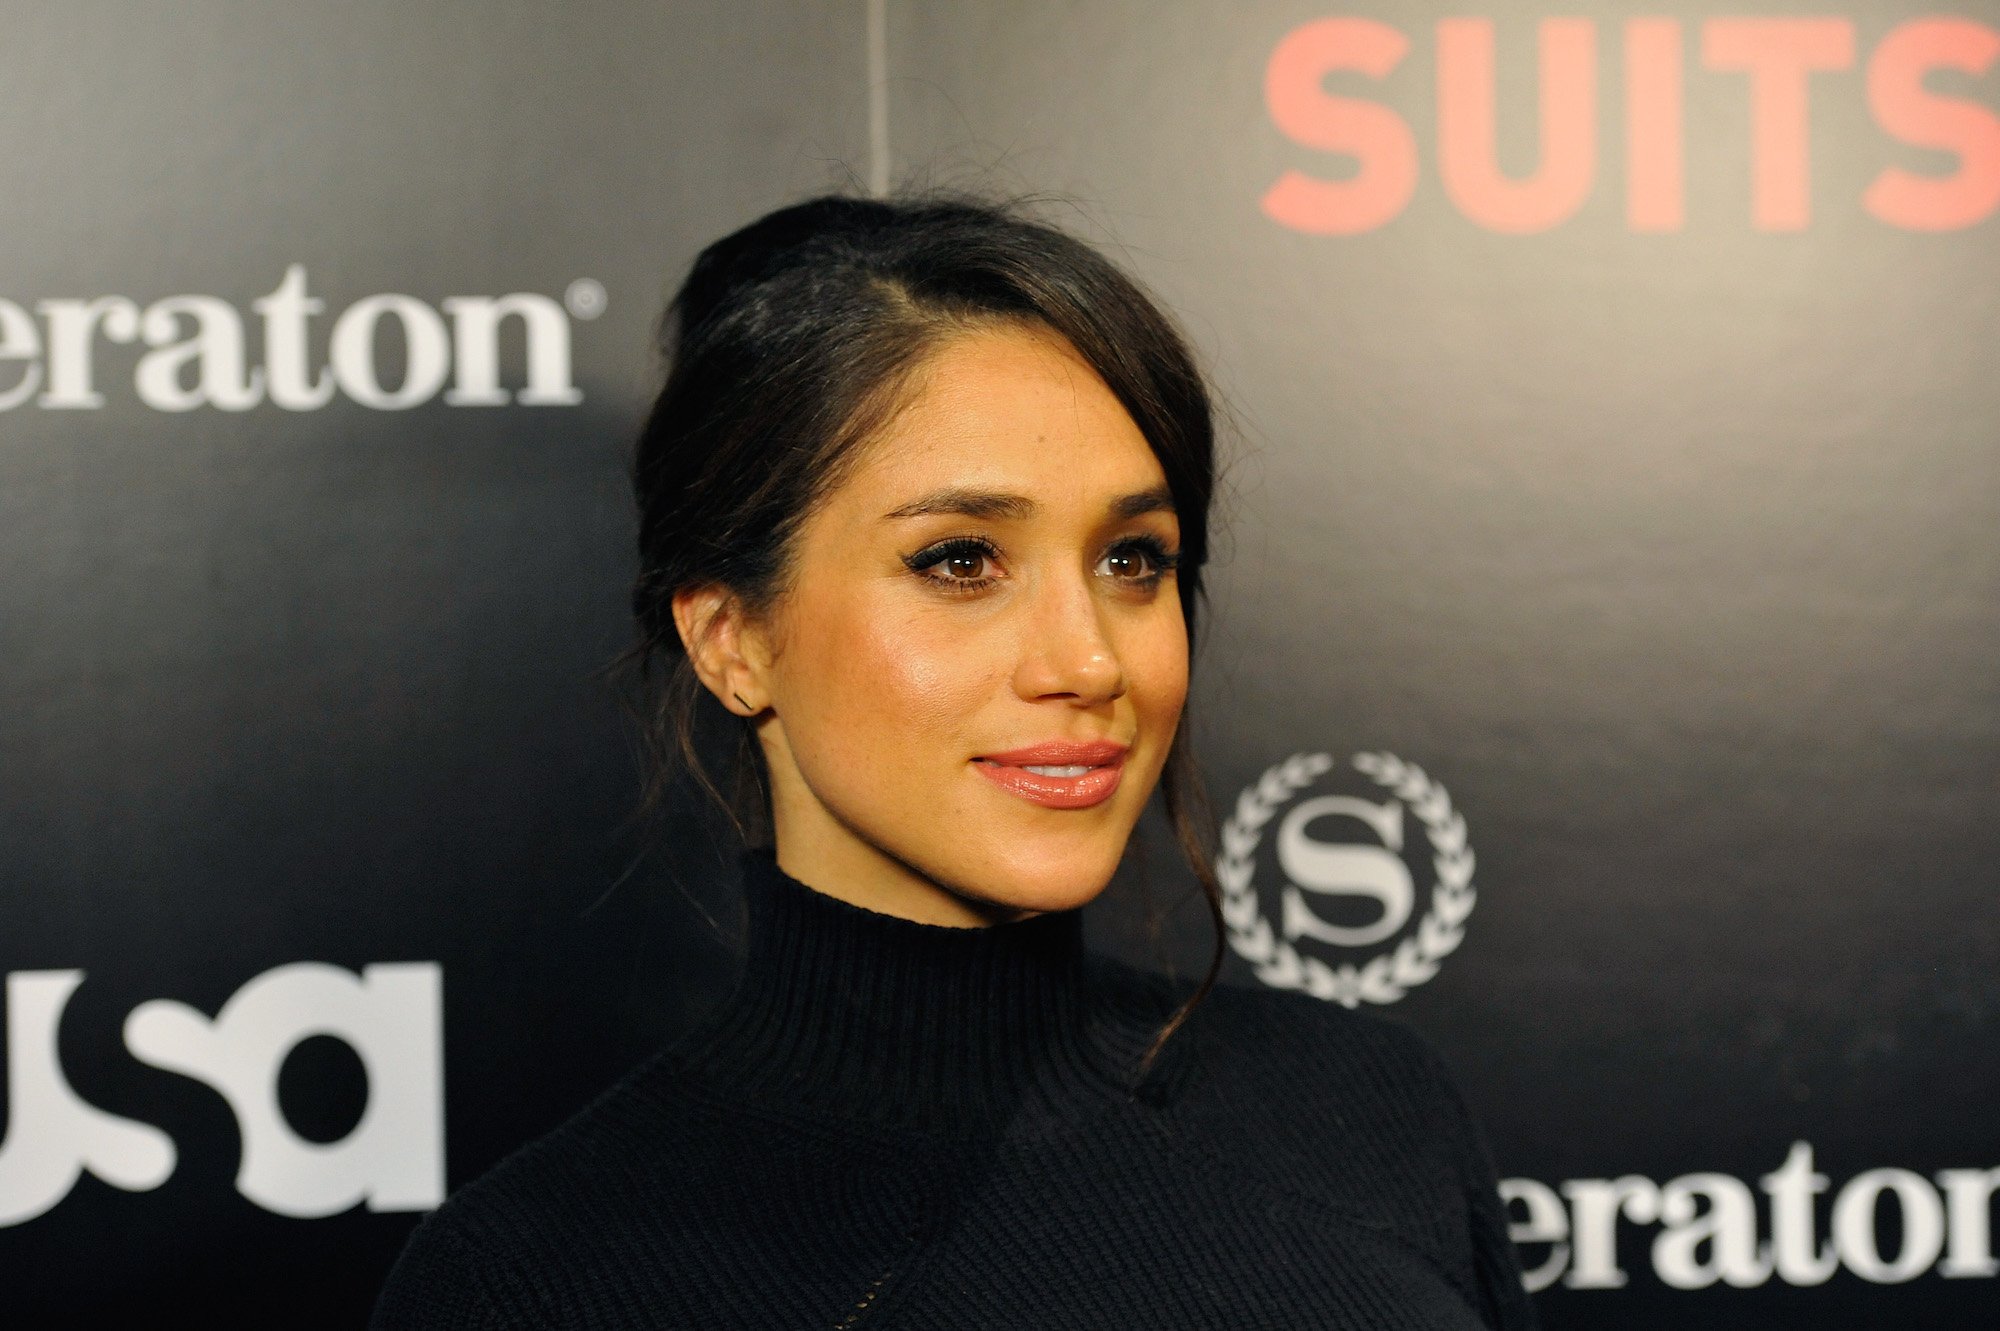 Meghan Markle smiling slightly in front of a black background